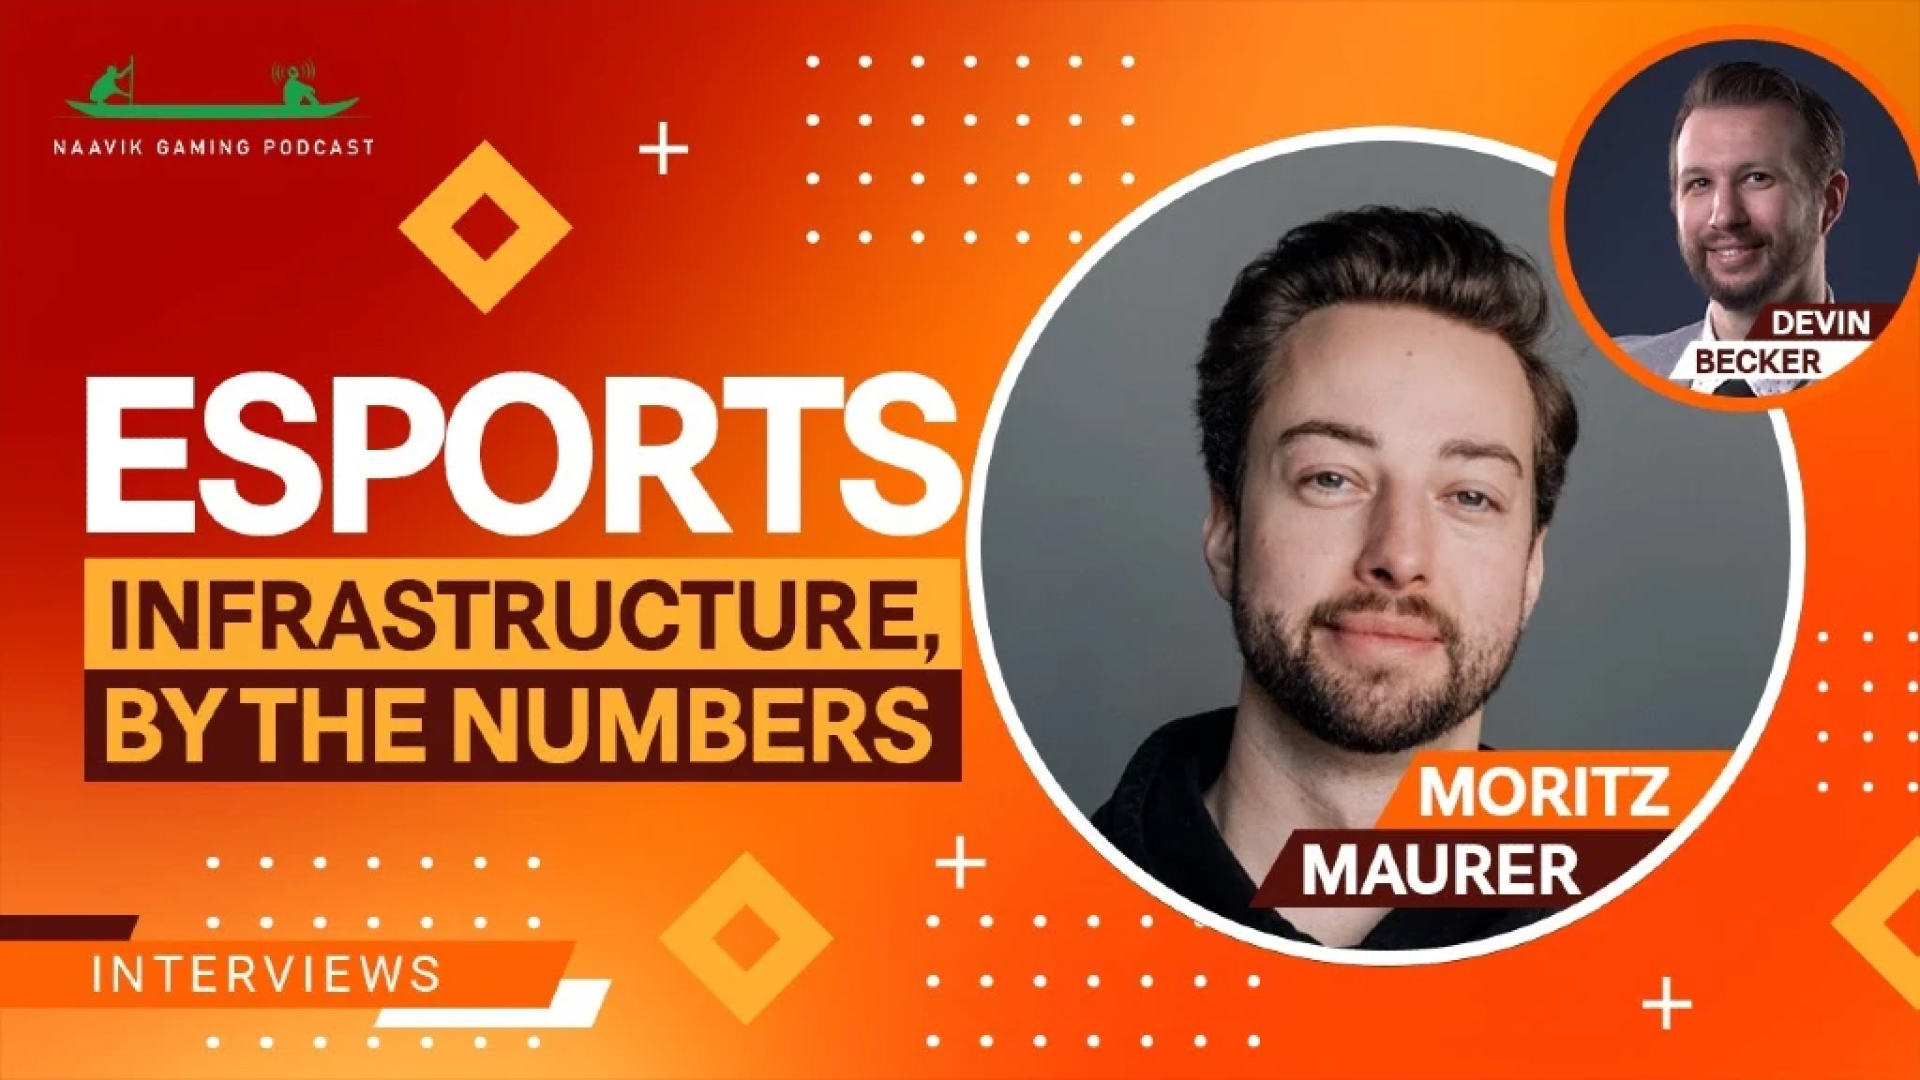 Esports Infrastructure, by the Numbers.